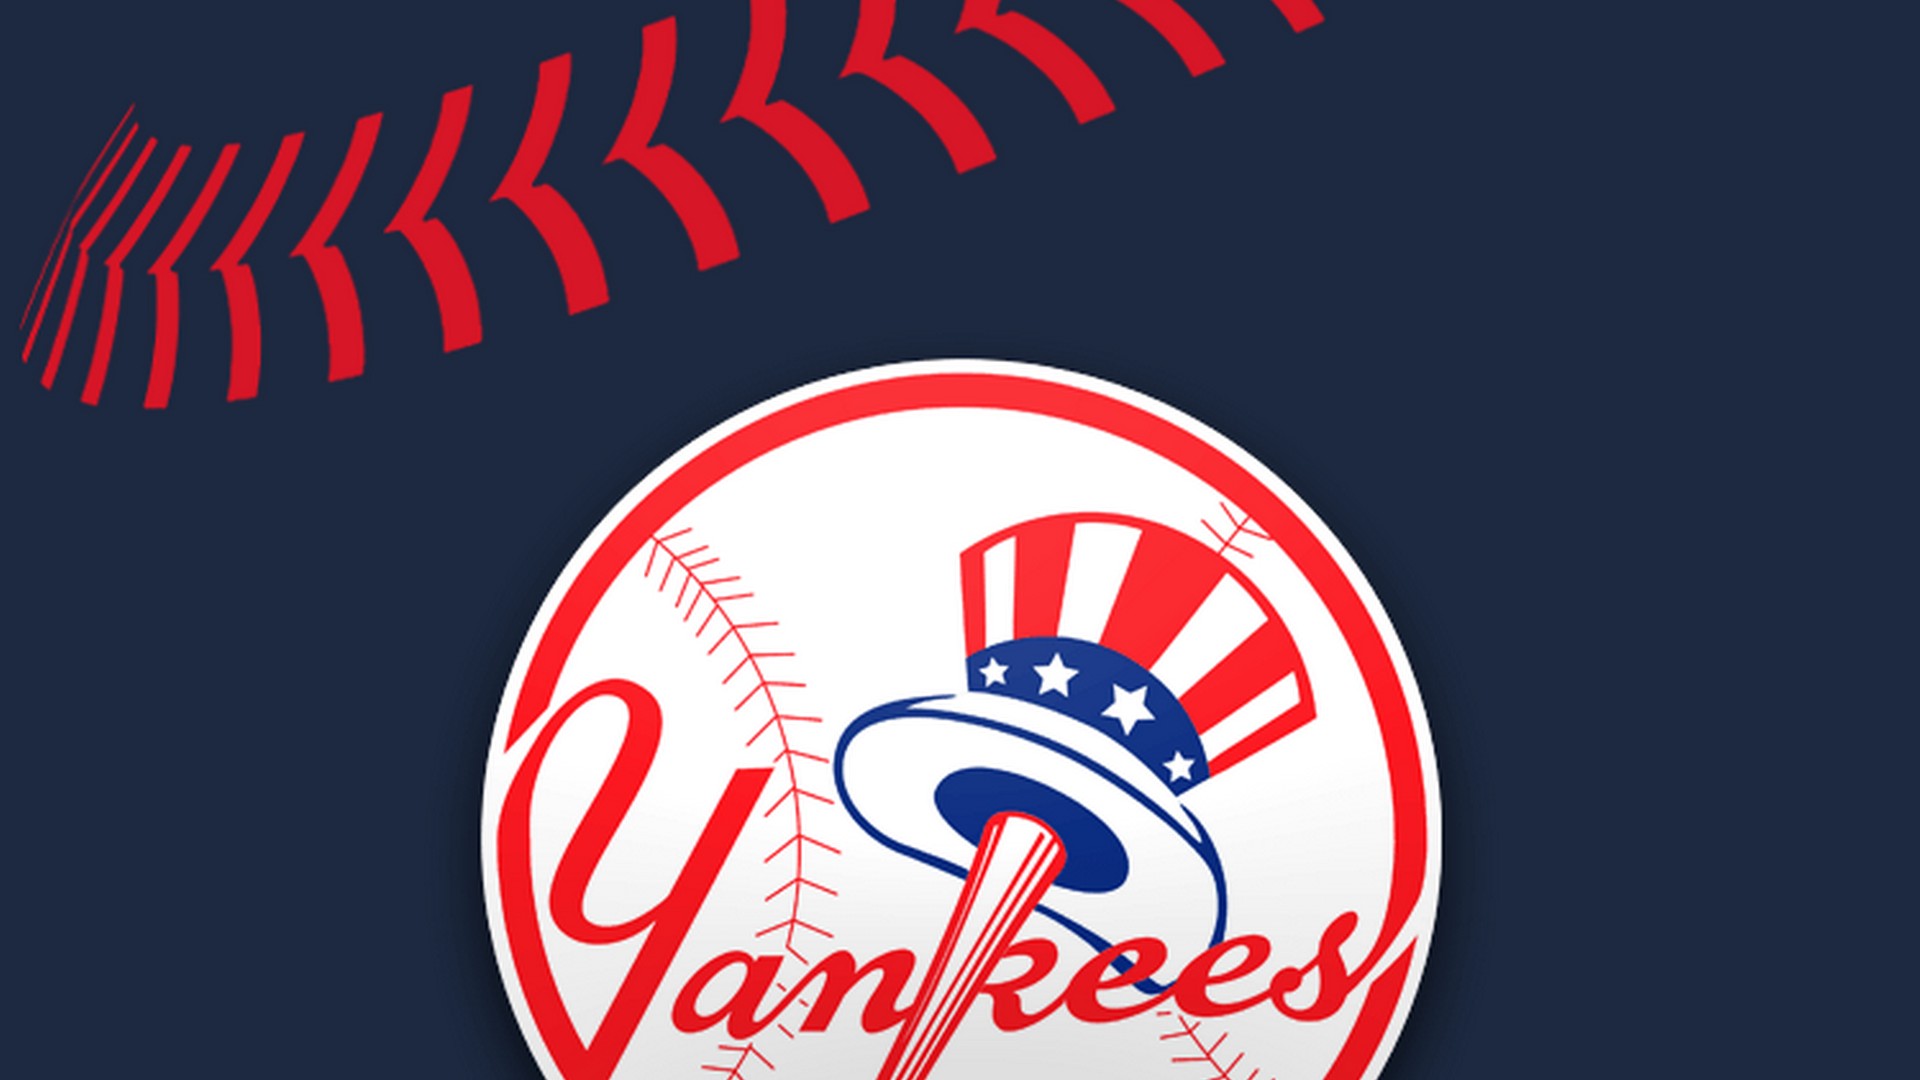 New York Yankees MLB Laptop Wallpaper with high-resolution 1920x1080 pixel. You can use this wallpaper for Mac Desktop Wallpaper, Laptop Screensavers, Android Wallpapers, Tablet or iPhone Home Screen and another mobile phone device